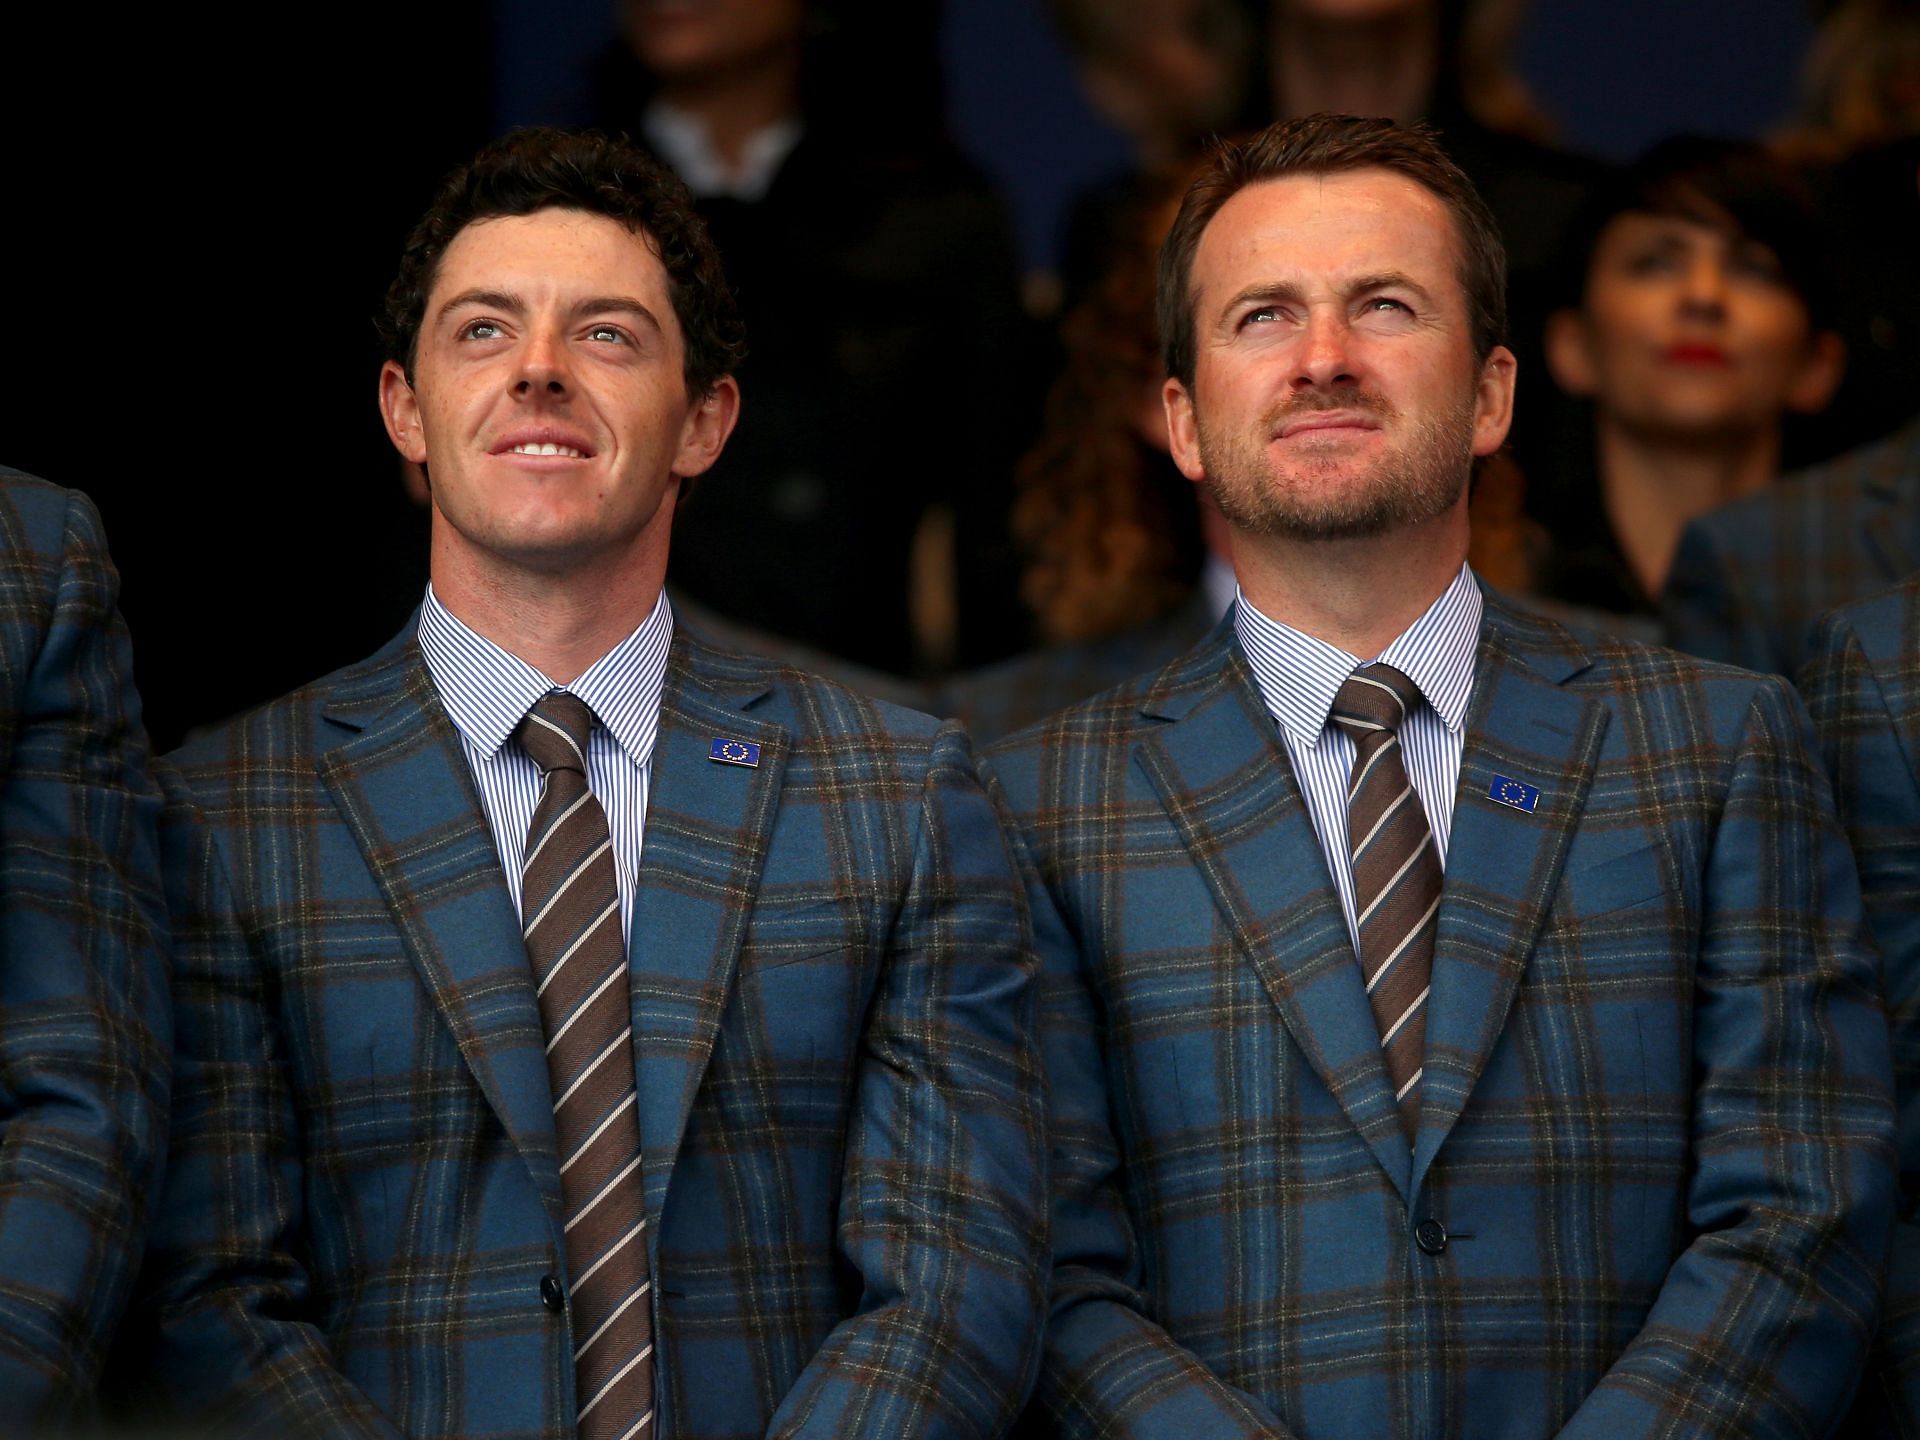 Rory McIlroy and Graeme McDowell (via Getty Images)